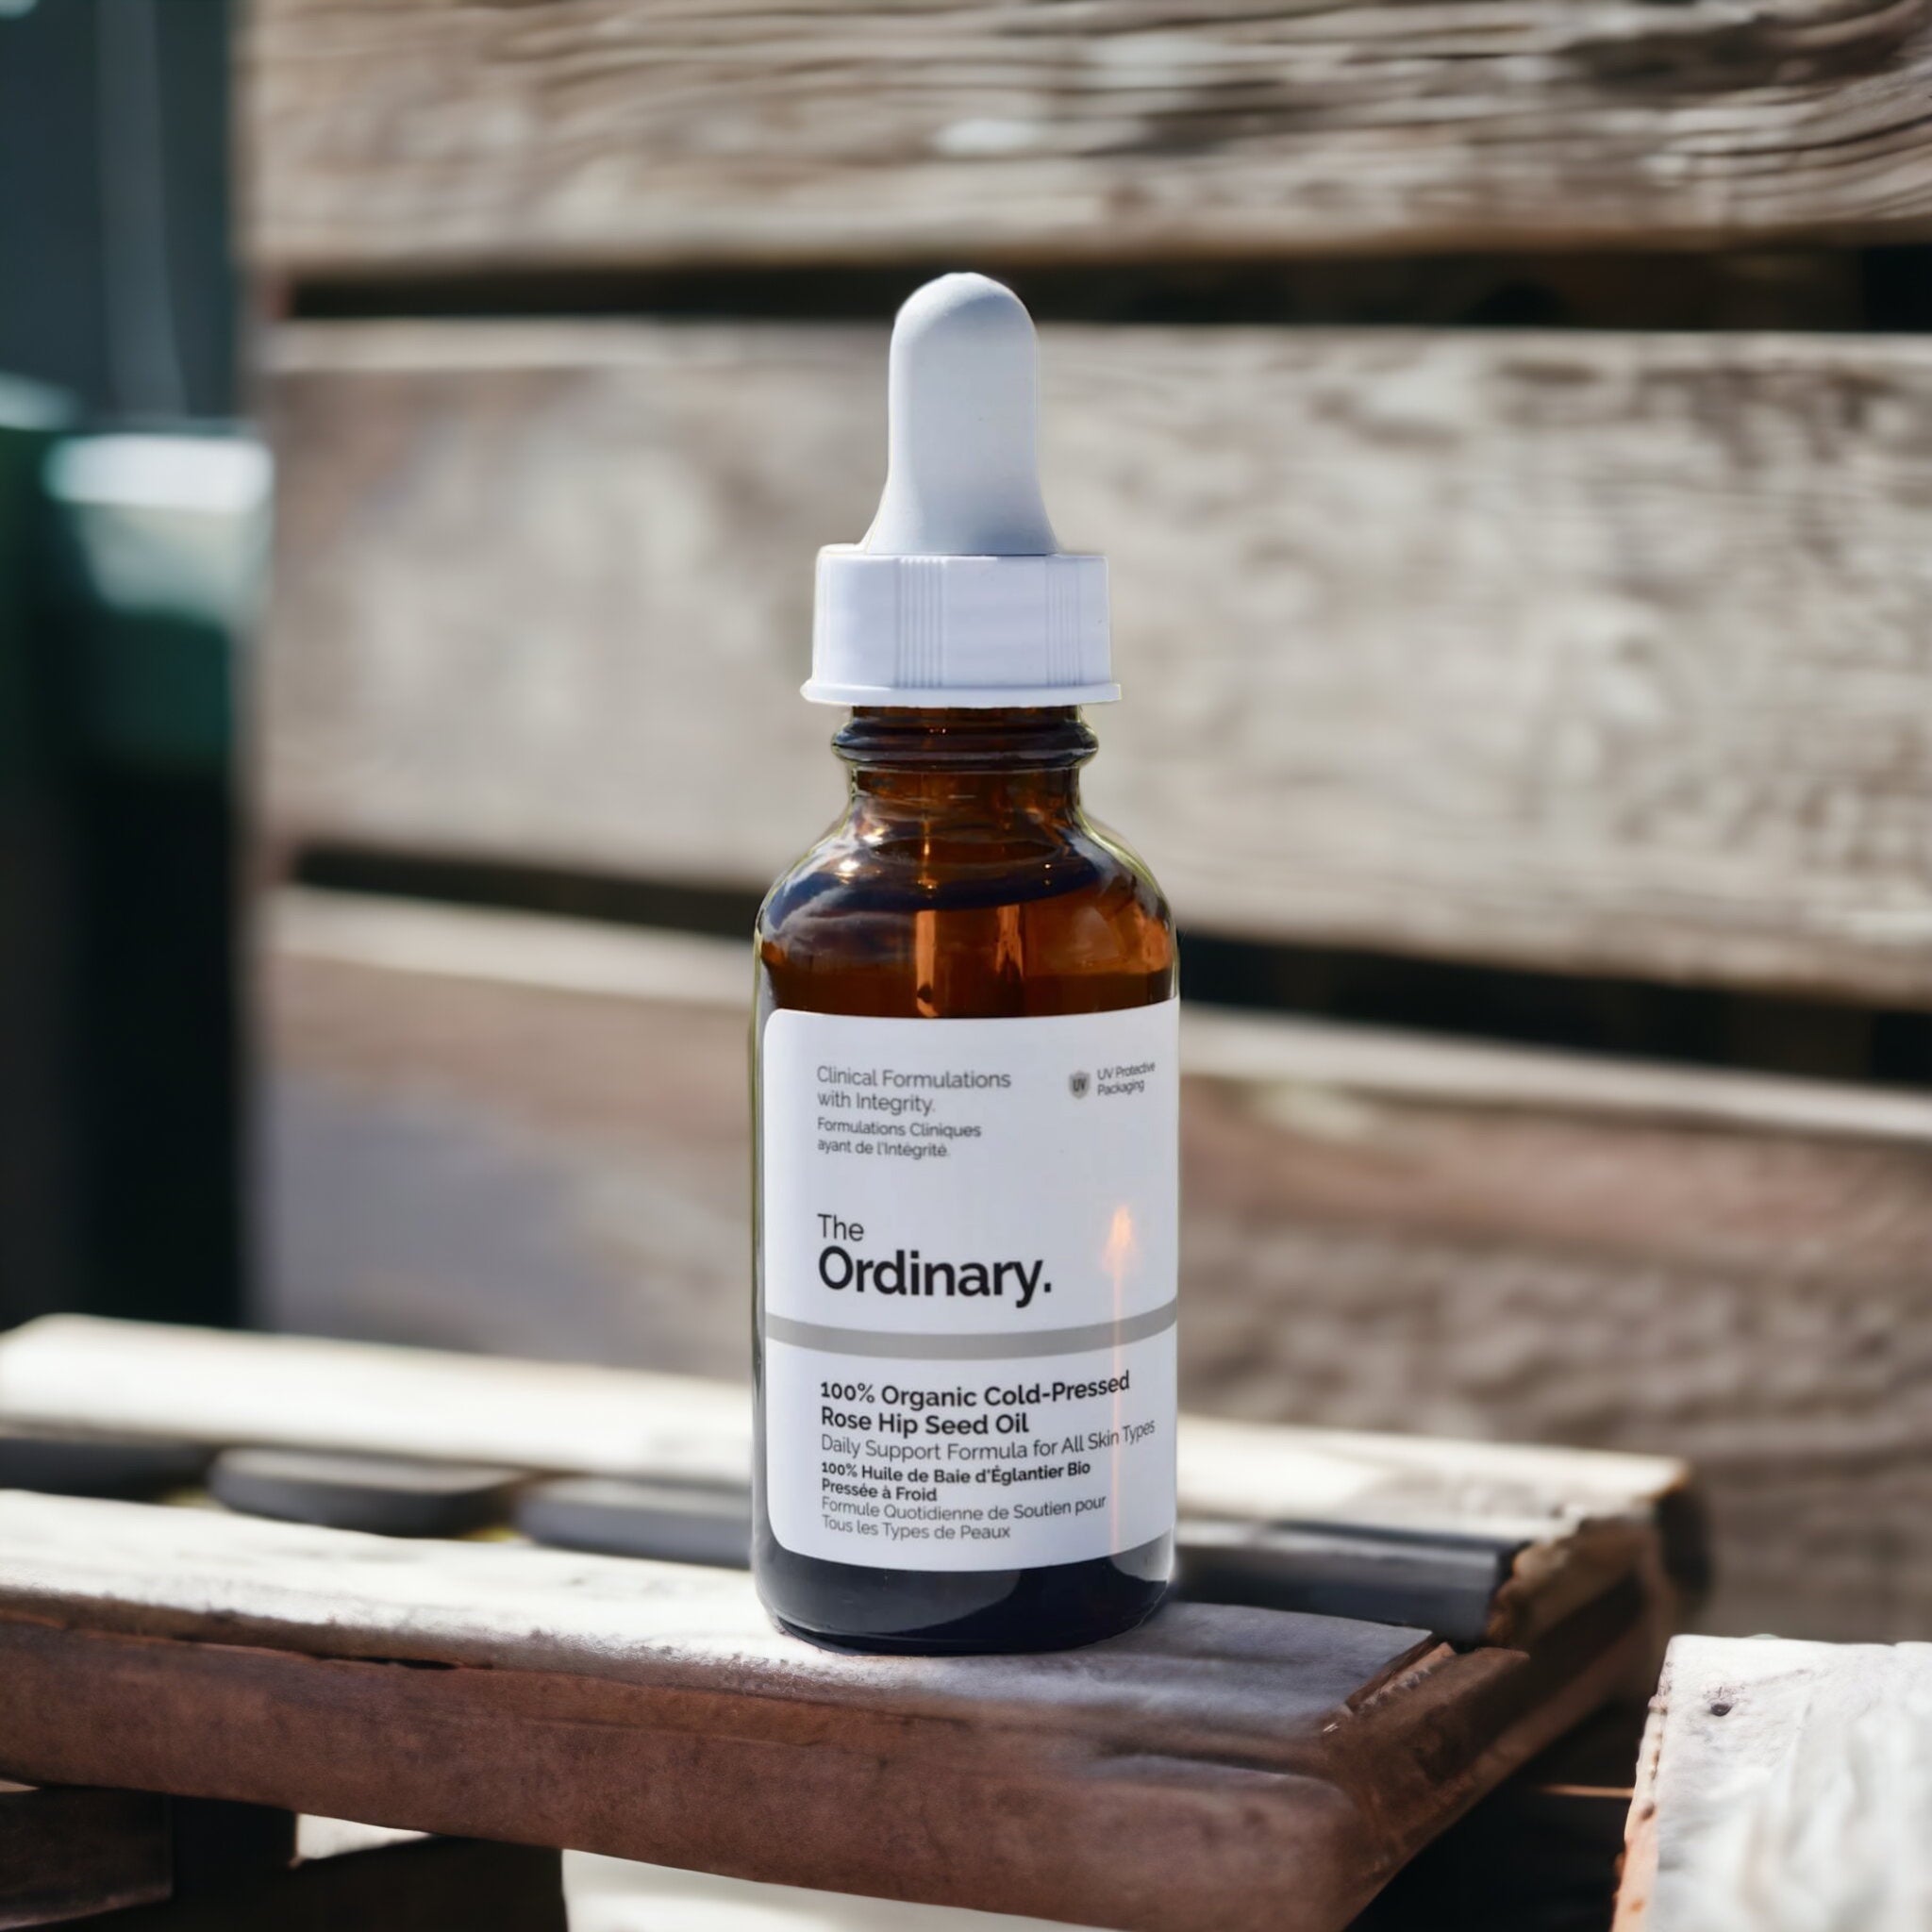 THE ORDINARY 100% ORGANIC COLD-PRESSED ROSE HIP SPEED OIL